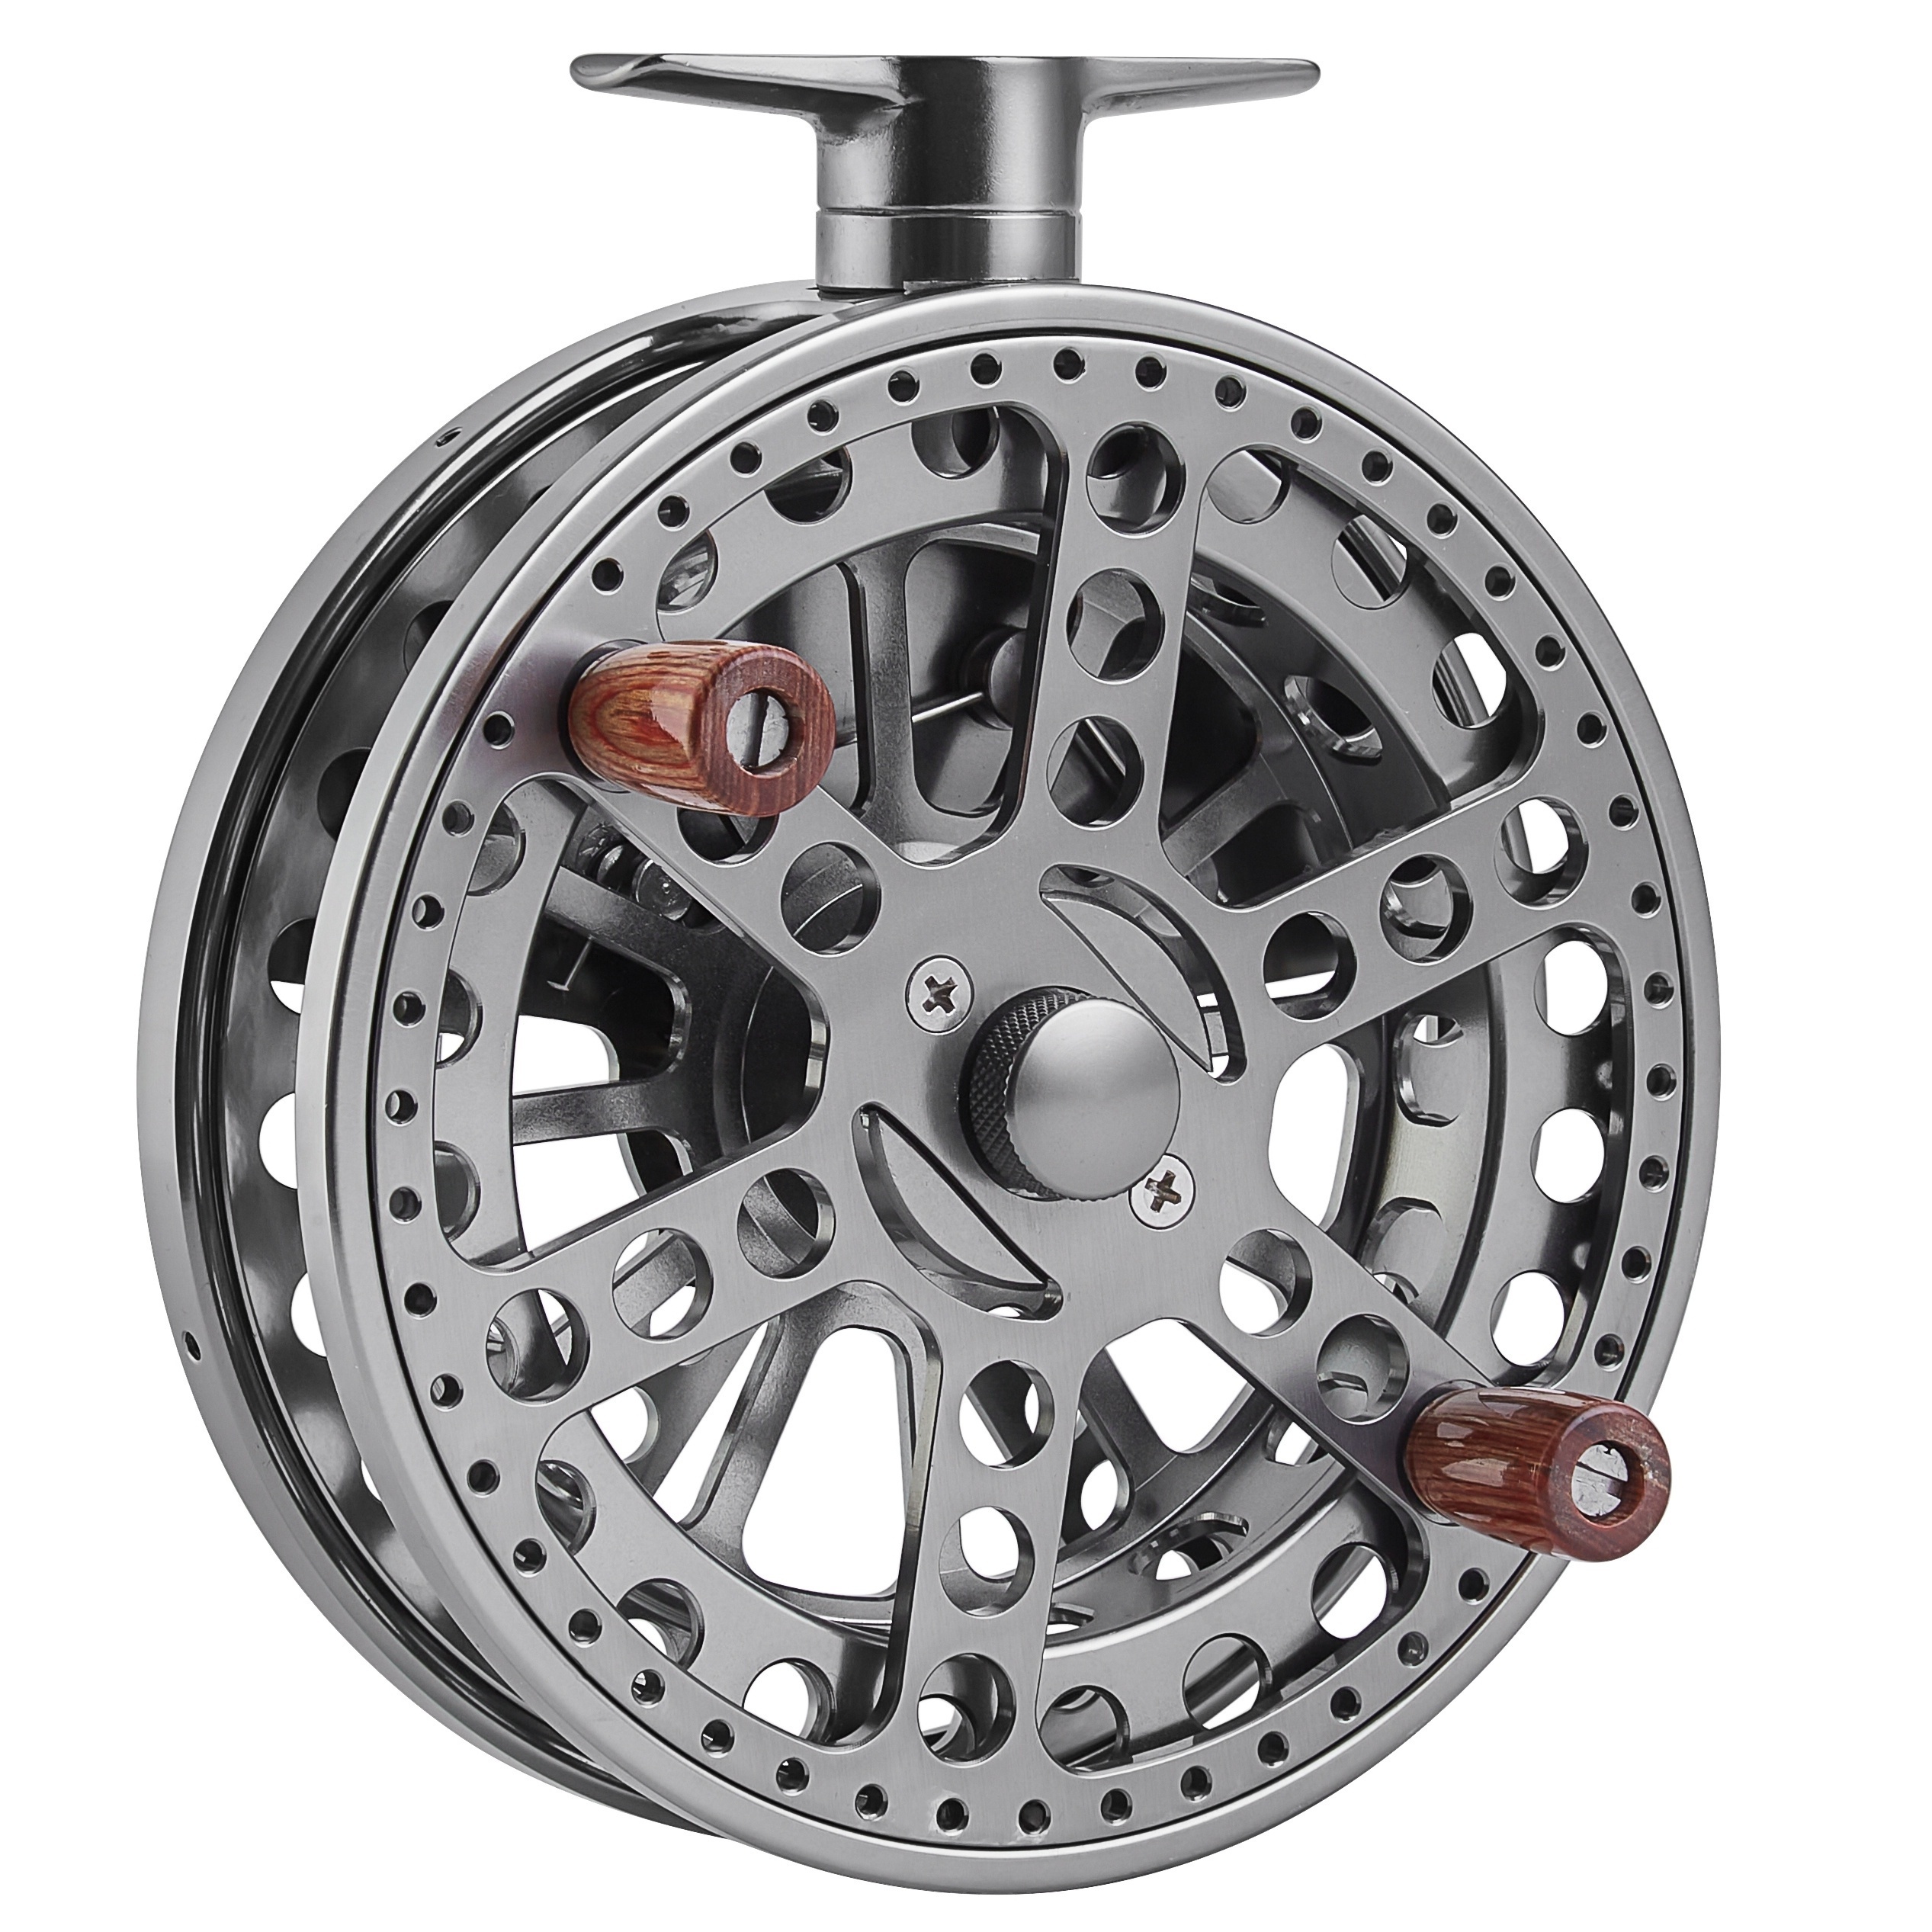 CNC Machined Aluminum 120mm Centerpin Float Fishing Reel - Direction  Changeable for Coarse Trotting, Barbel, and Salmon Fishing